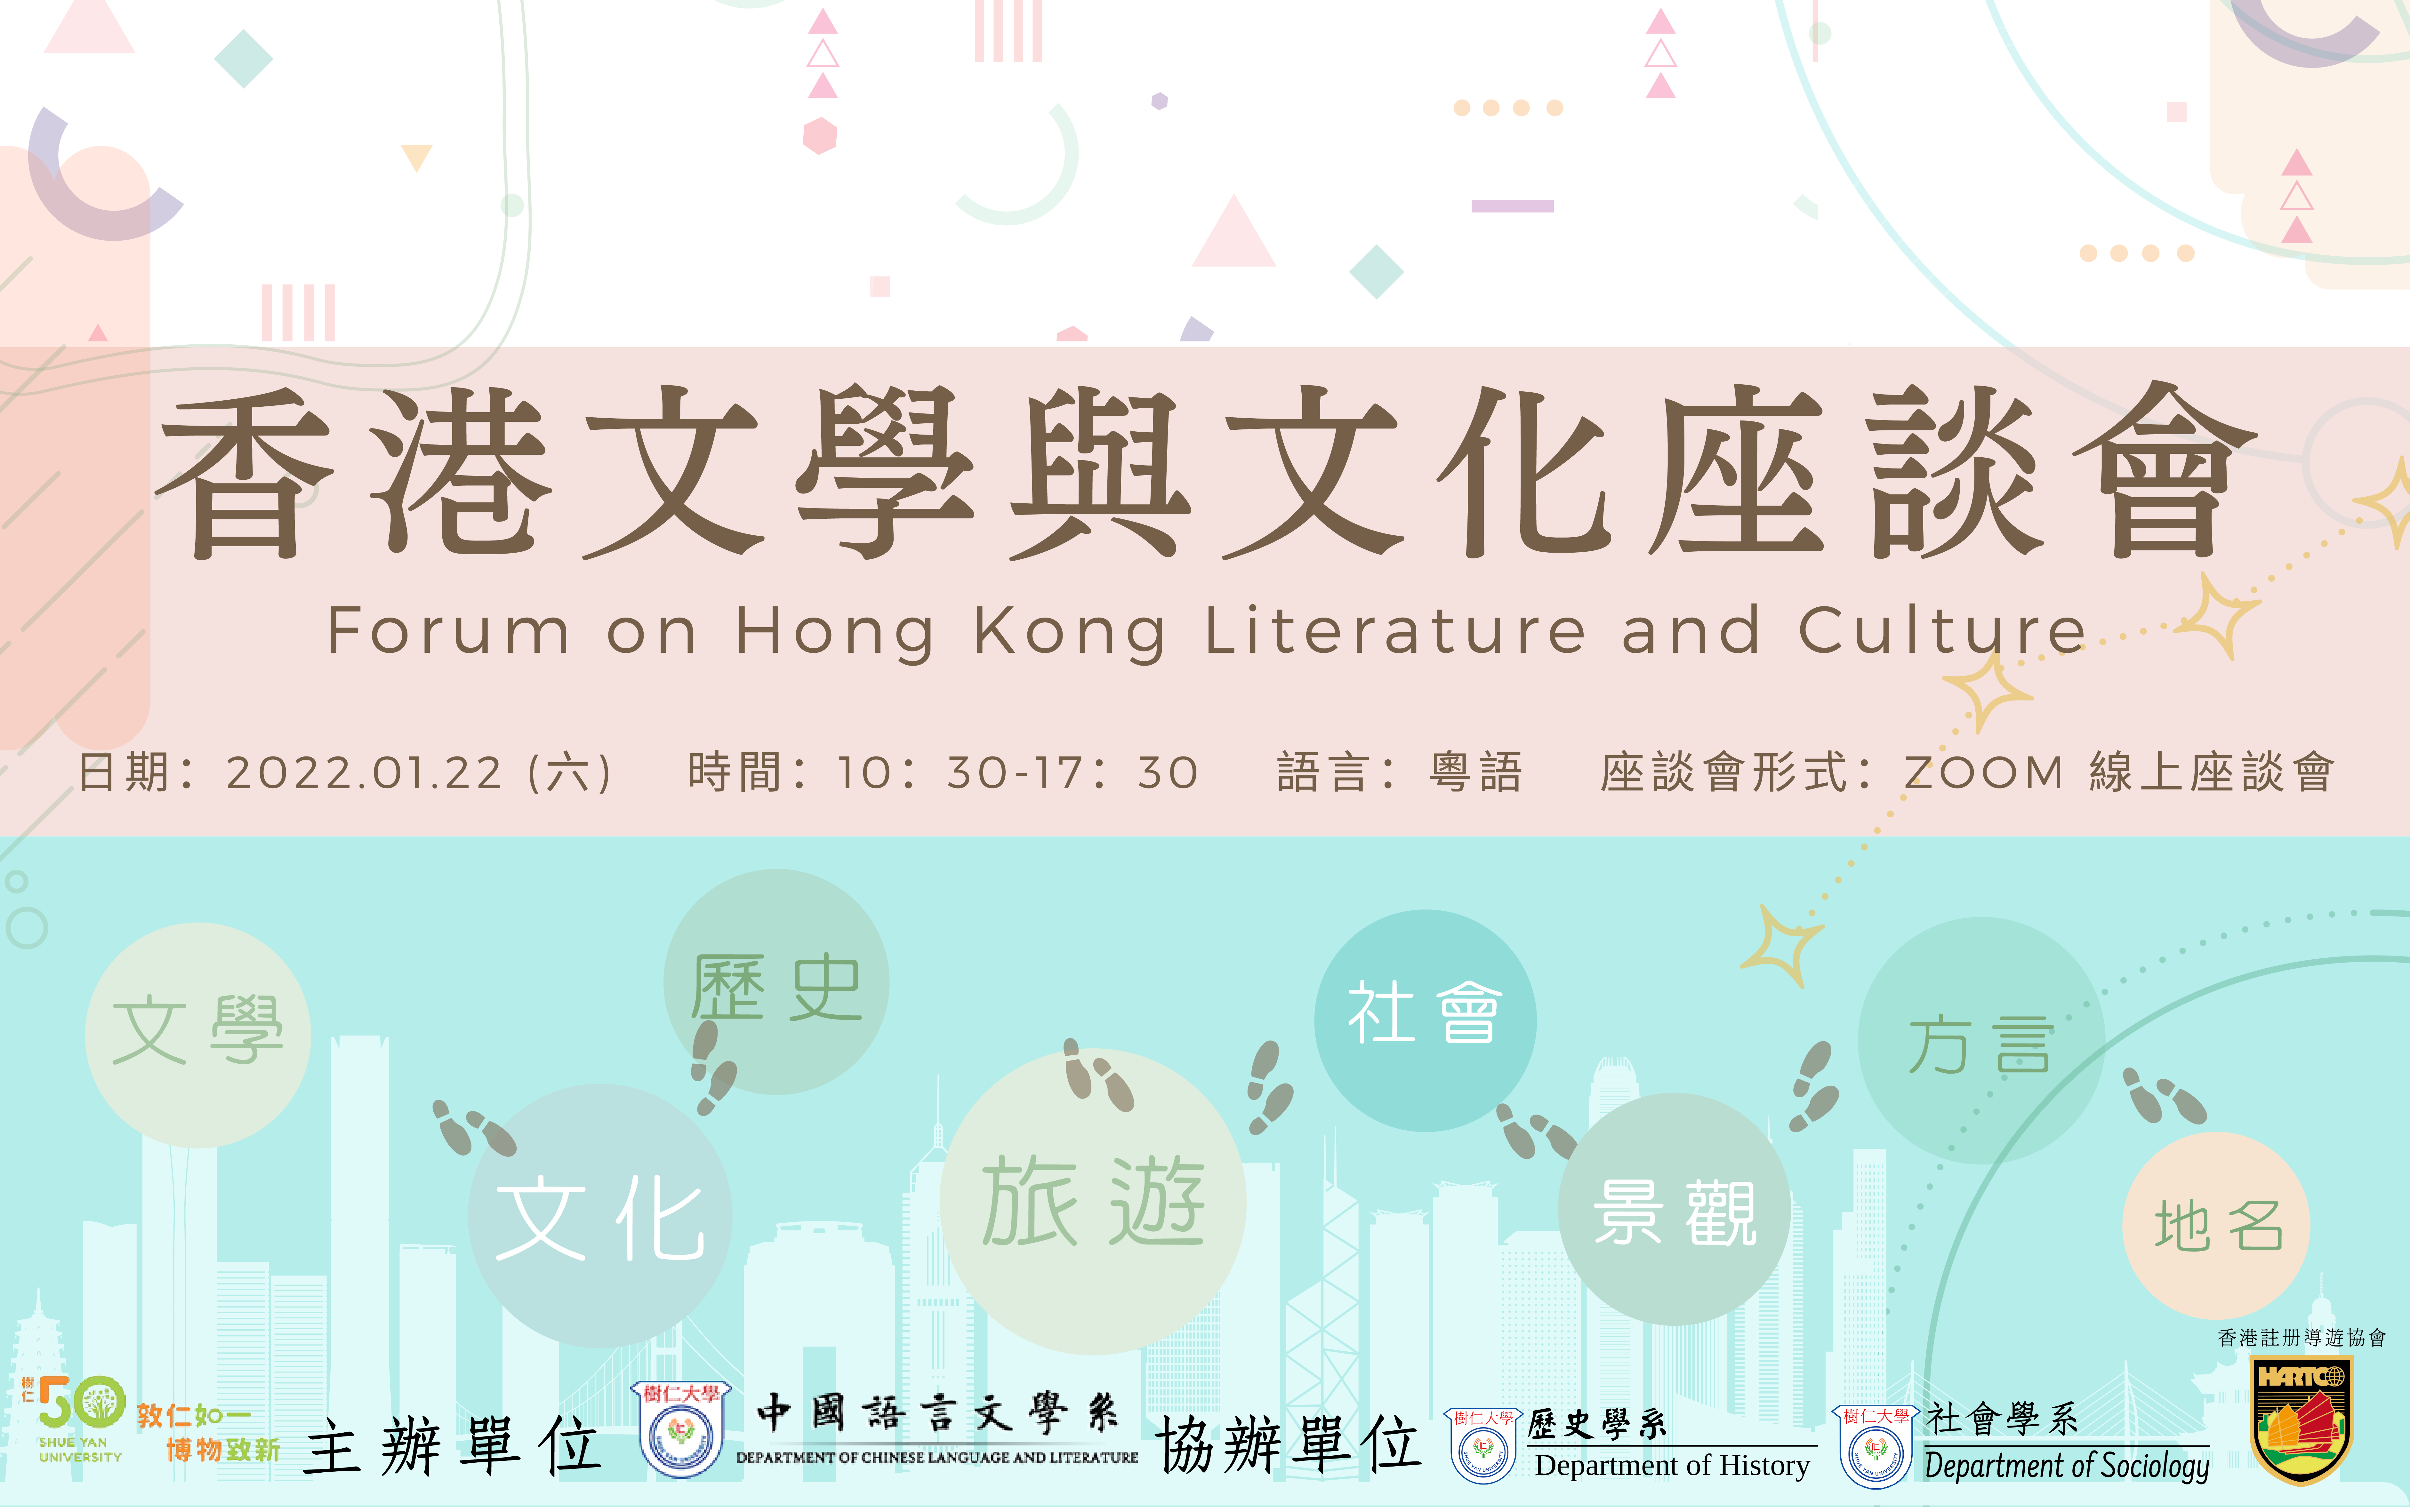 Forum on Hong Kong Literature and Culture